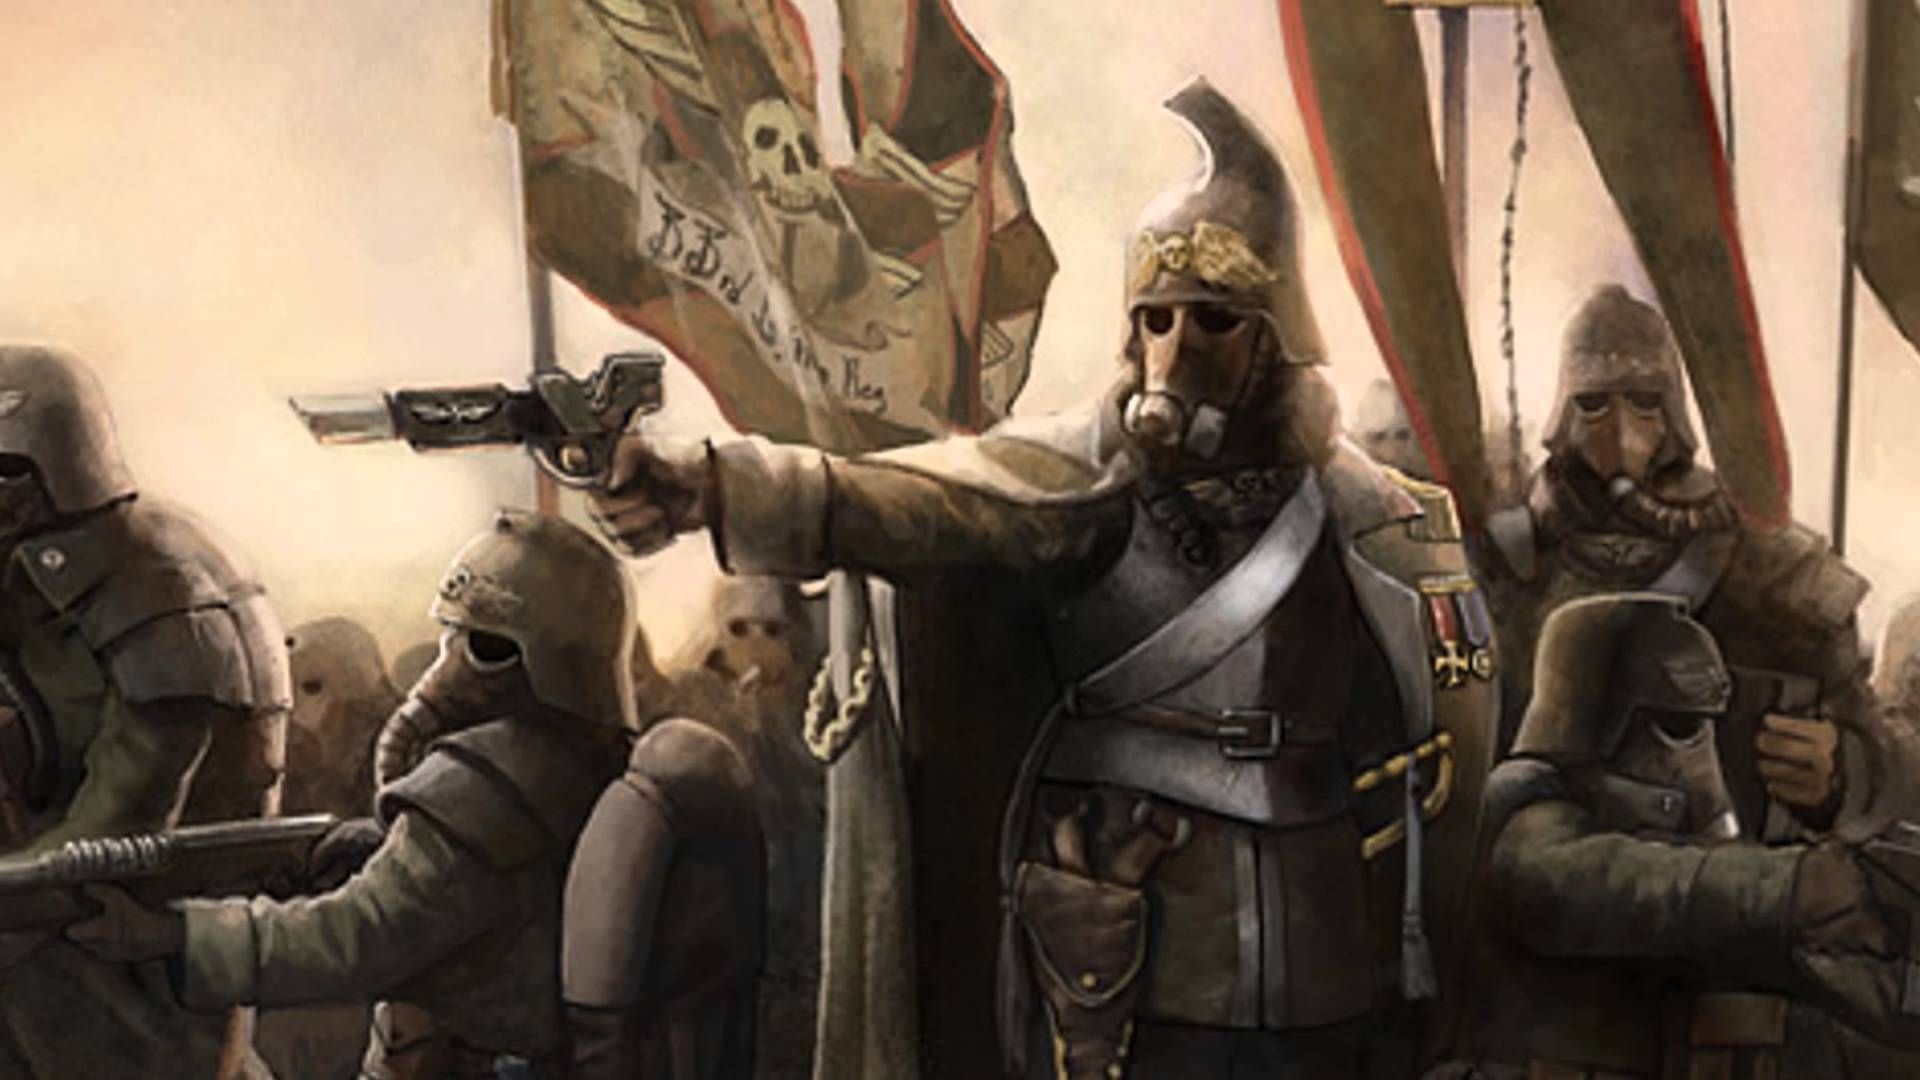 warhammer 40k imperial guard wallpapers